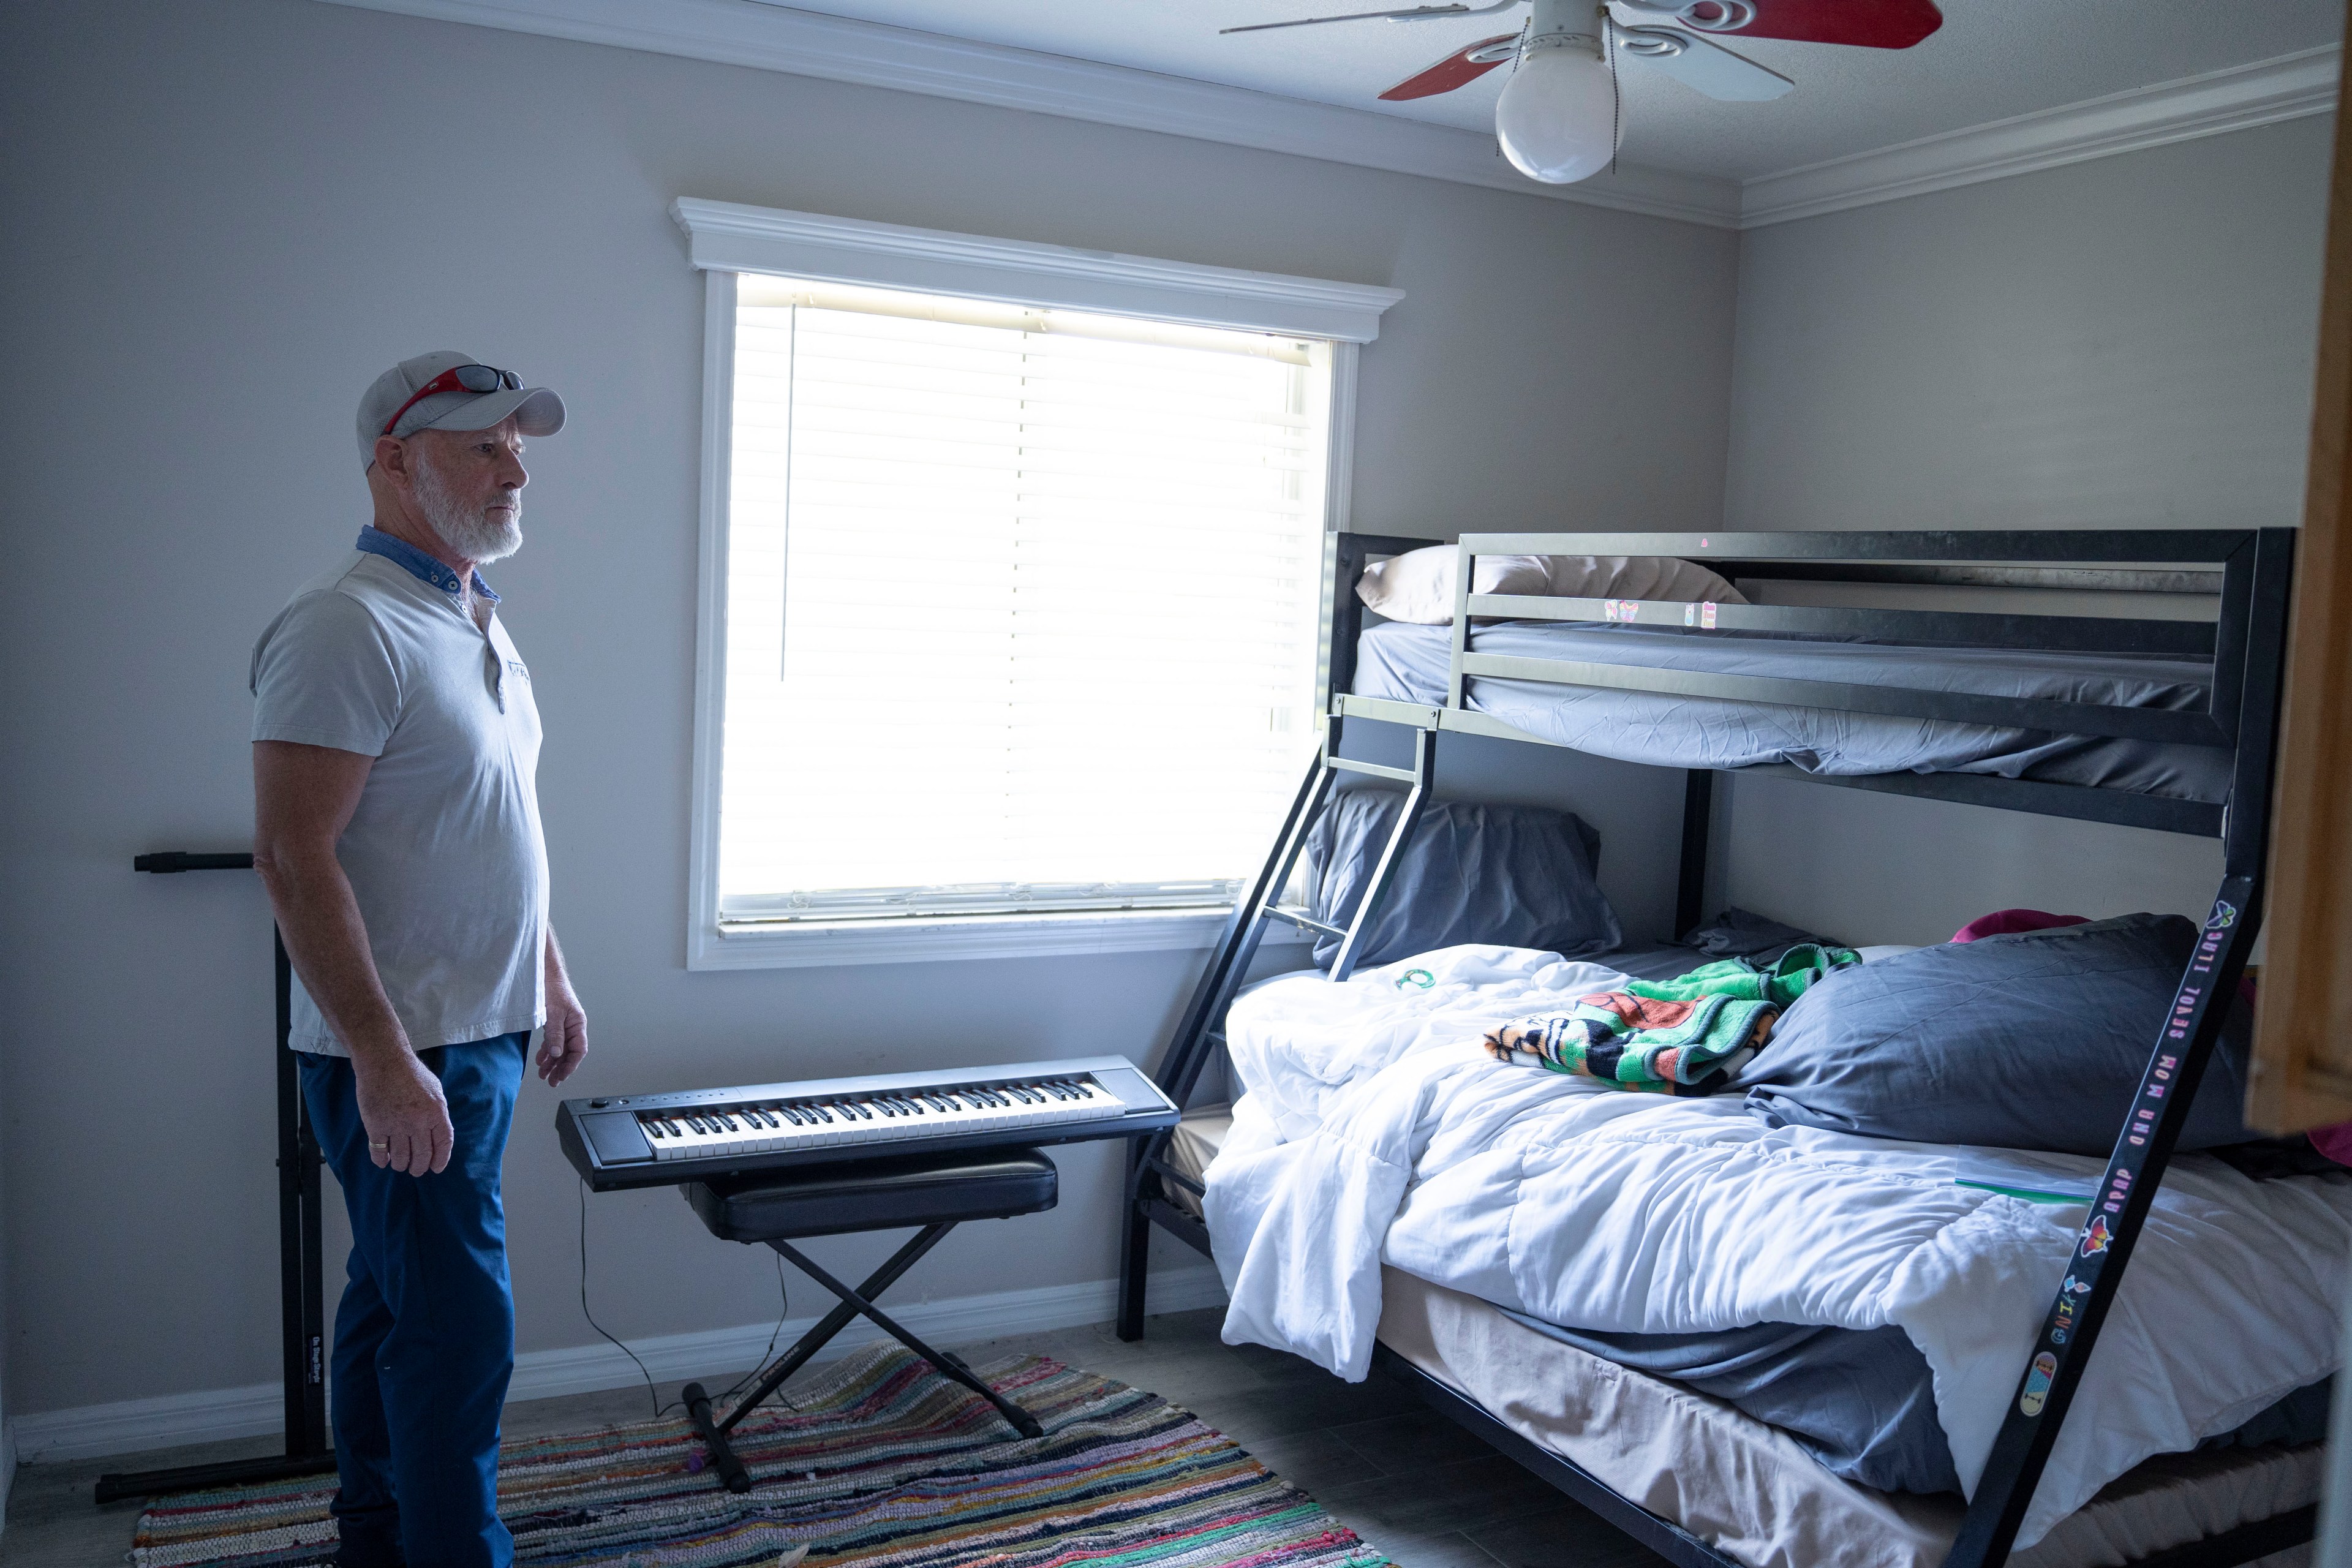 A man stands by a keyboard in a room with a bunk bed and a window with blinds.